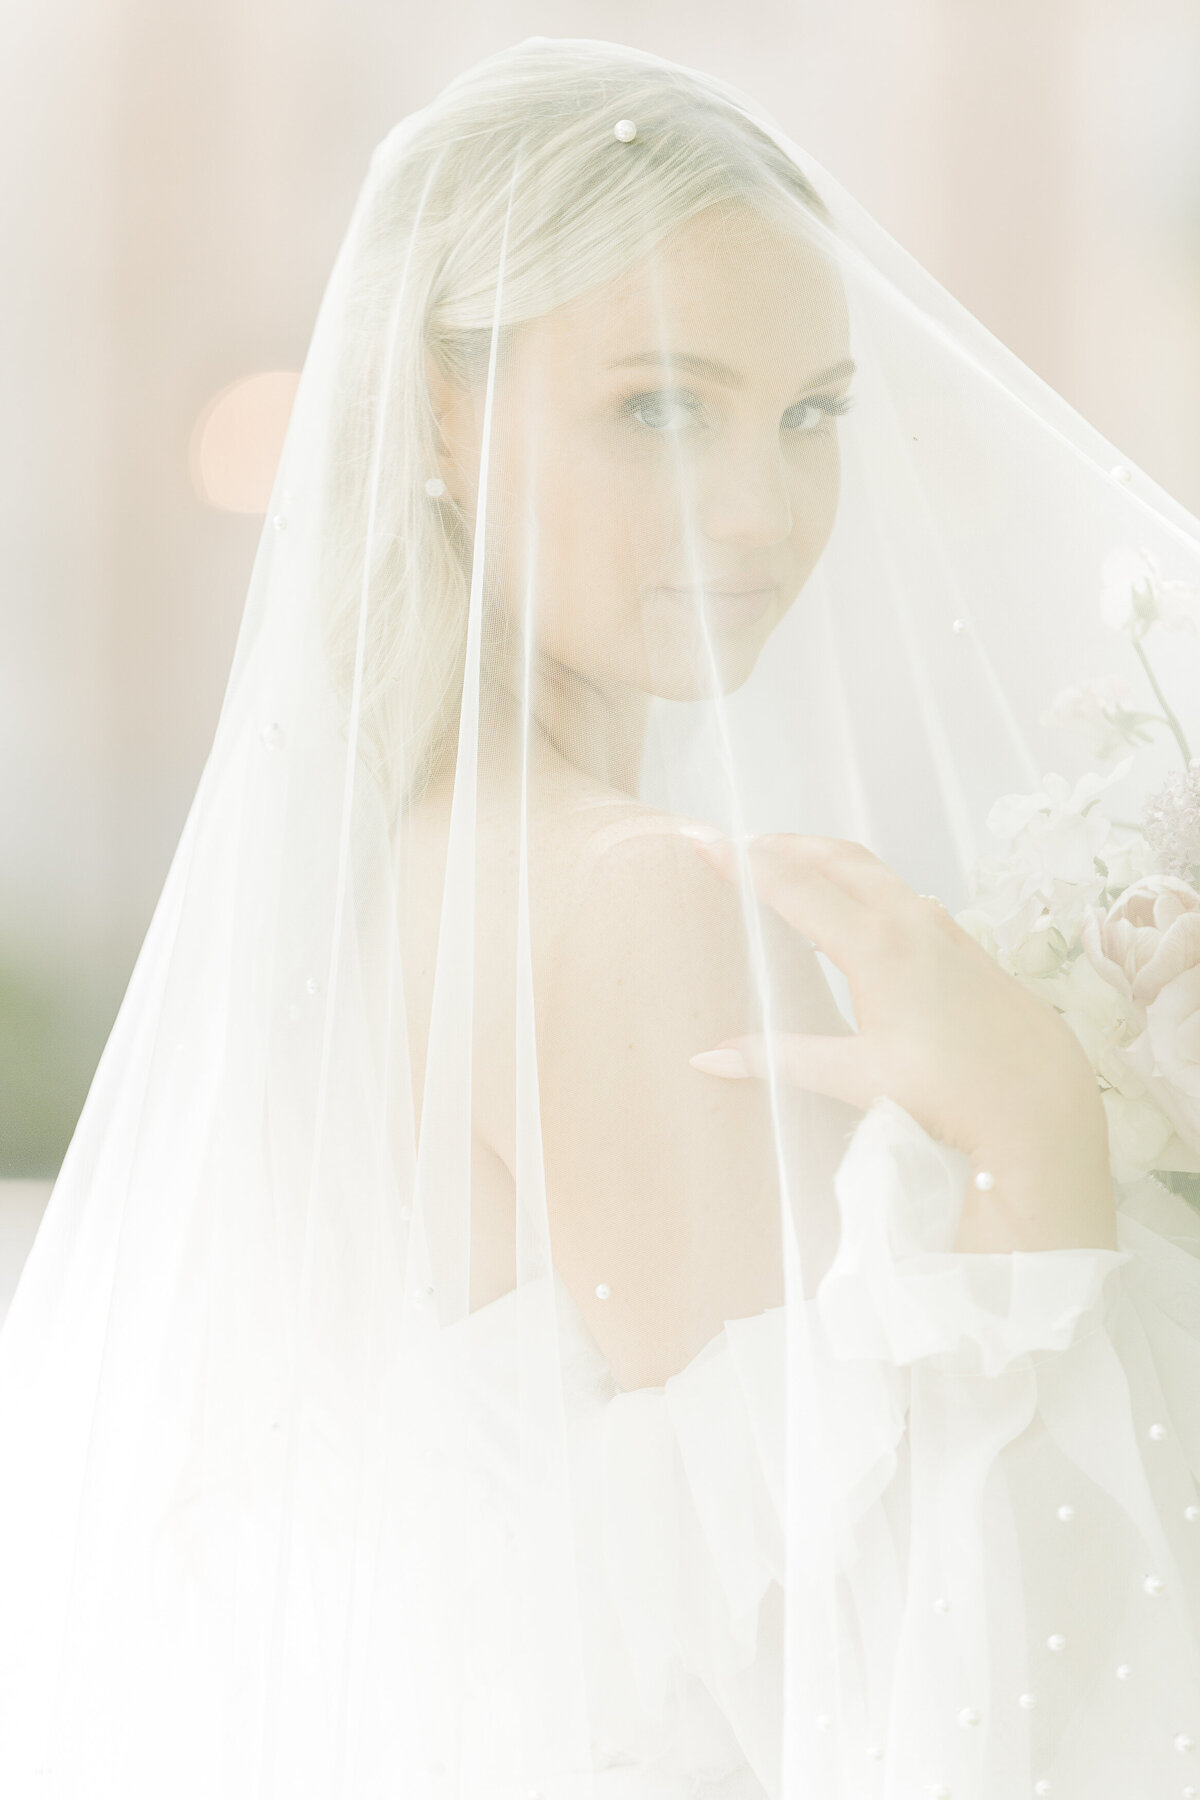 A North Shore bride poses for a formal wedding portrait in Boston. The bride has her veil pulled over her face, her forehand touching her shoulder and back hand holding her bouquet under the veil. The image is light and airy, almost with a light haze. Captured by best MA wedding photographer Lia Rose Weddings